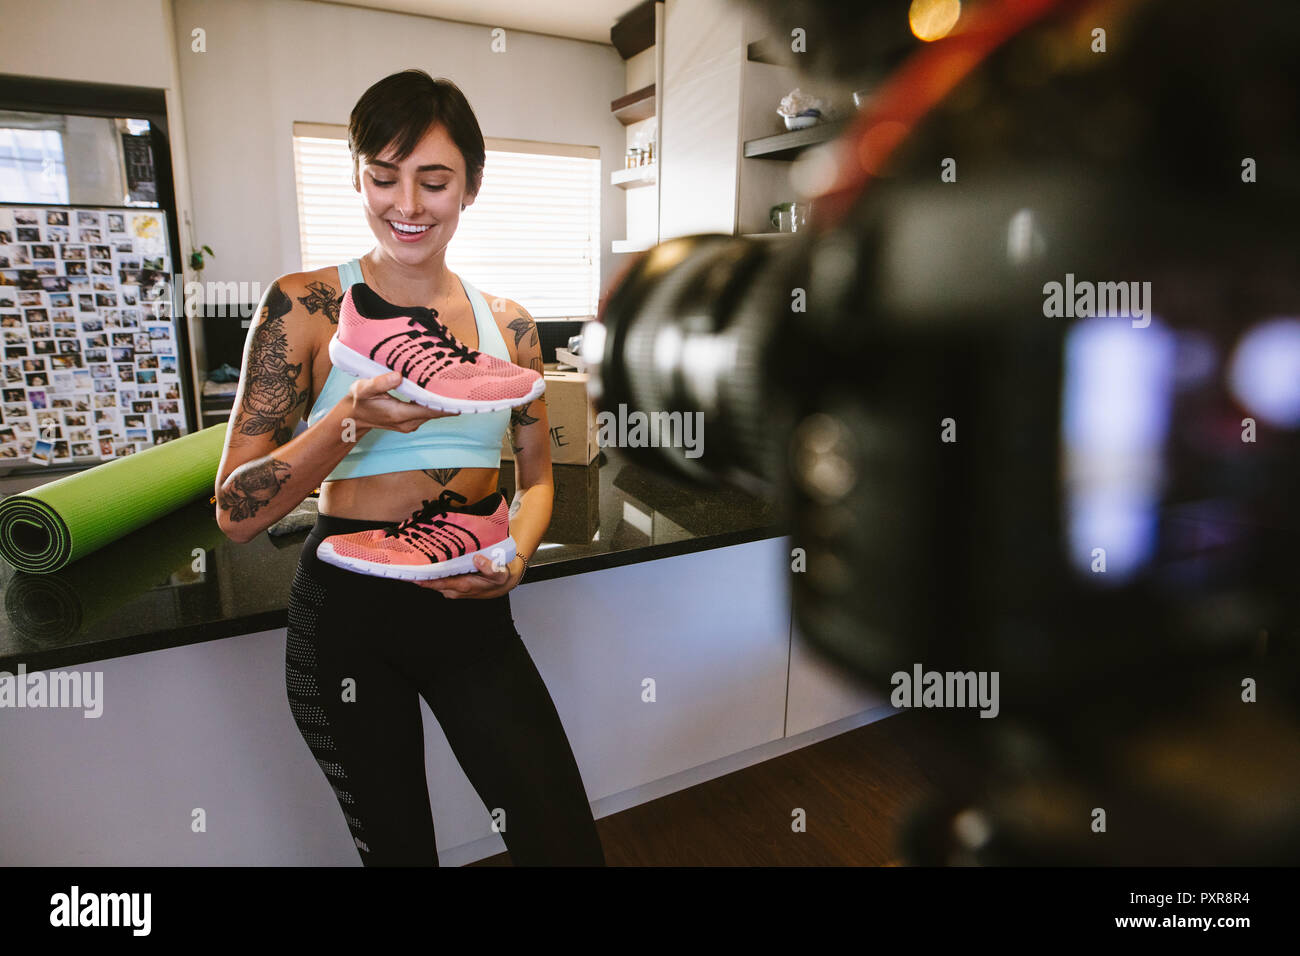 Smiling female vlogger holding sport shoes in hands, recording new sportswear video for vlog on camera. Woman social media influencer explaining the b Stock Photo